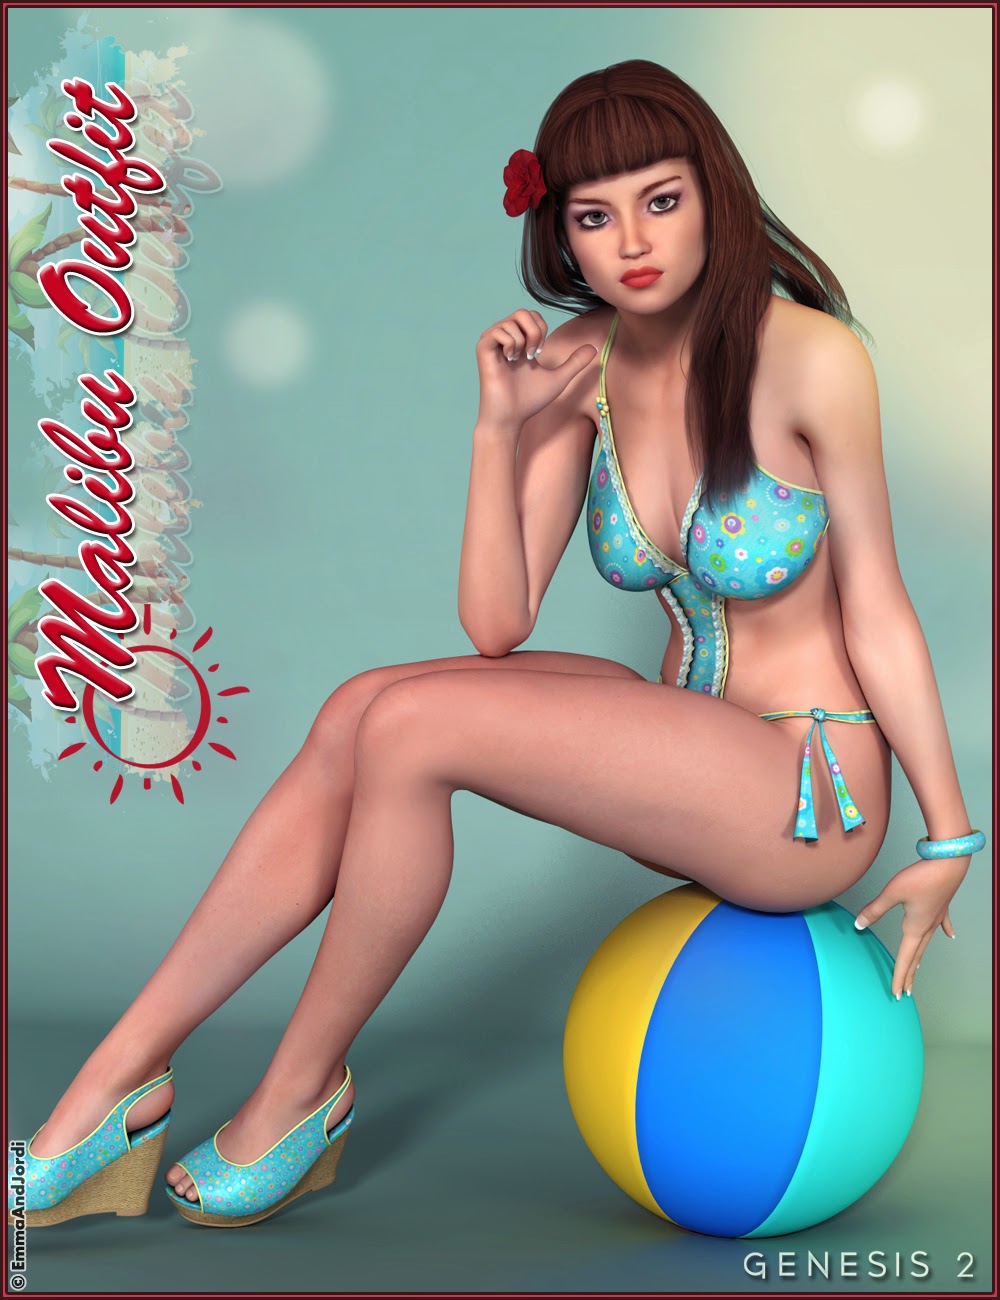 http://www.daz3d.com/malibu-outfit-and-accessories